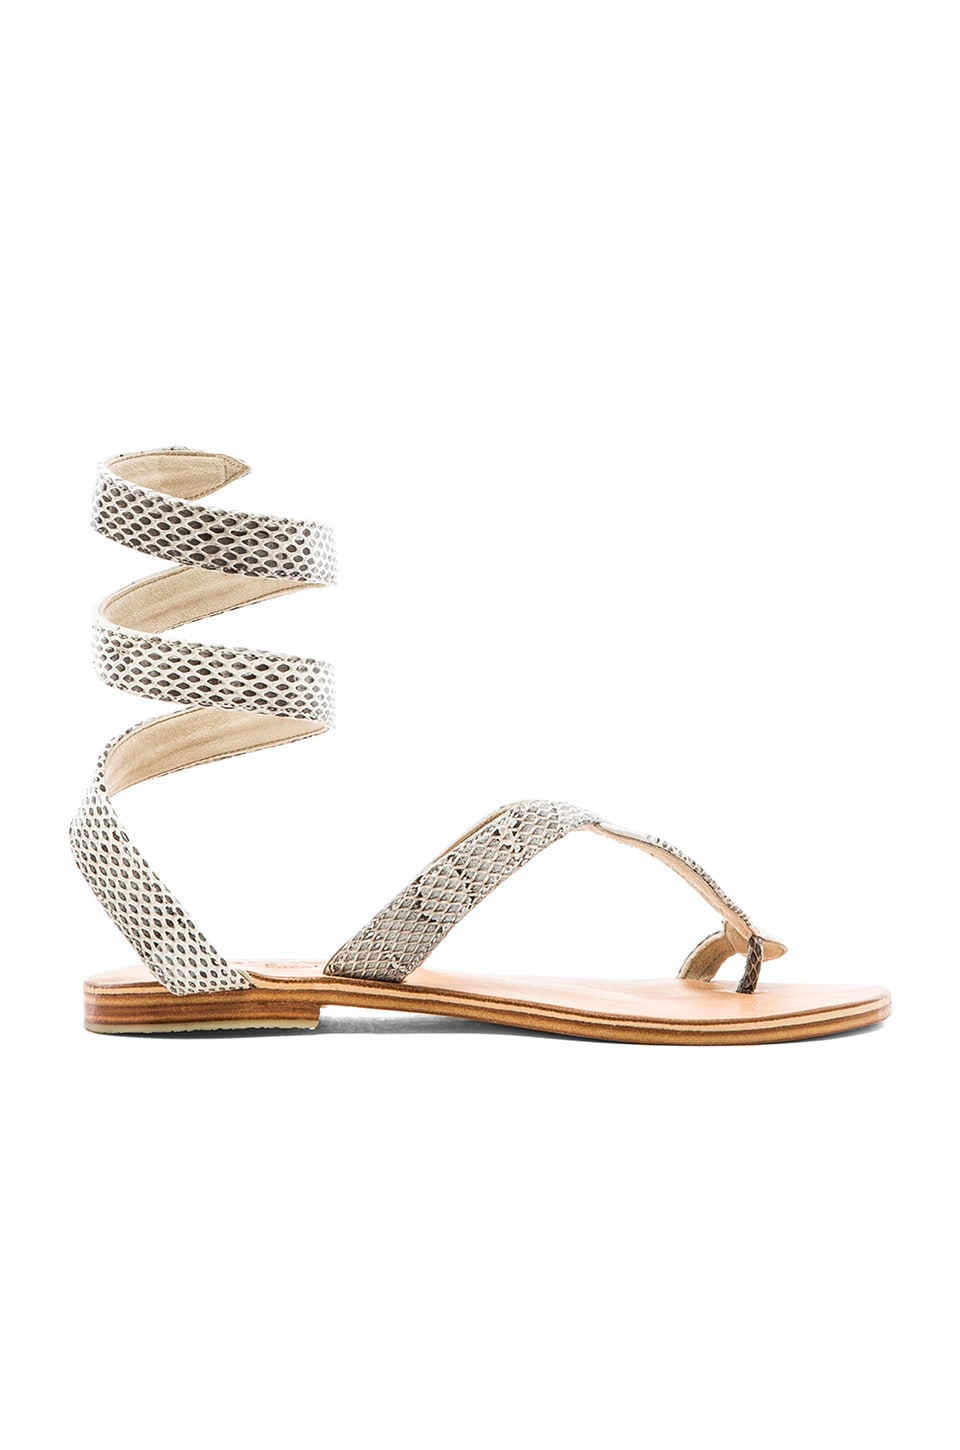 LSPACE by Cocobelle Snake Wrap Sandal in Natural | REVOLVE